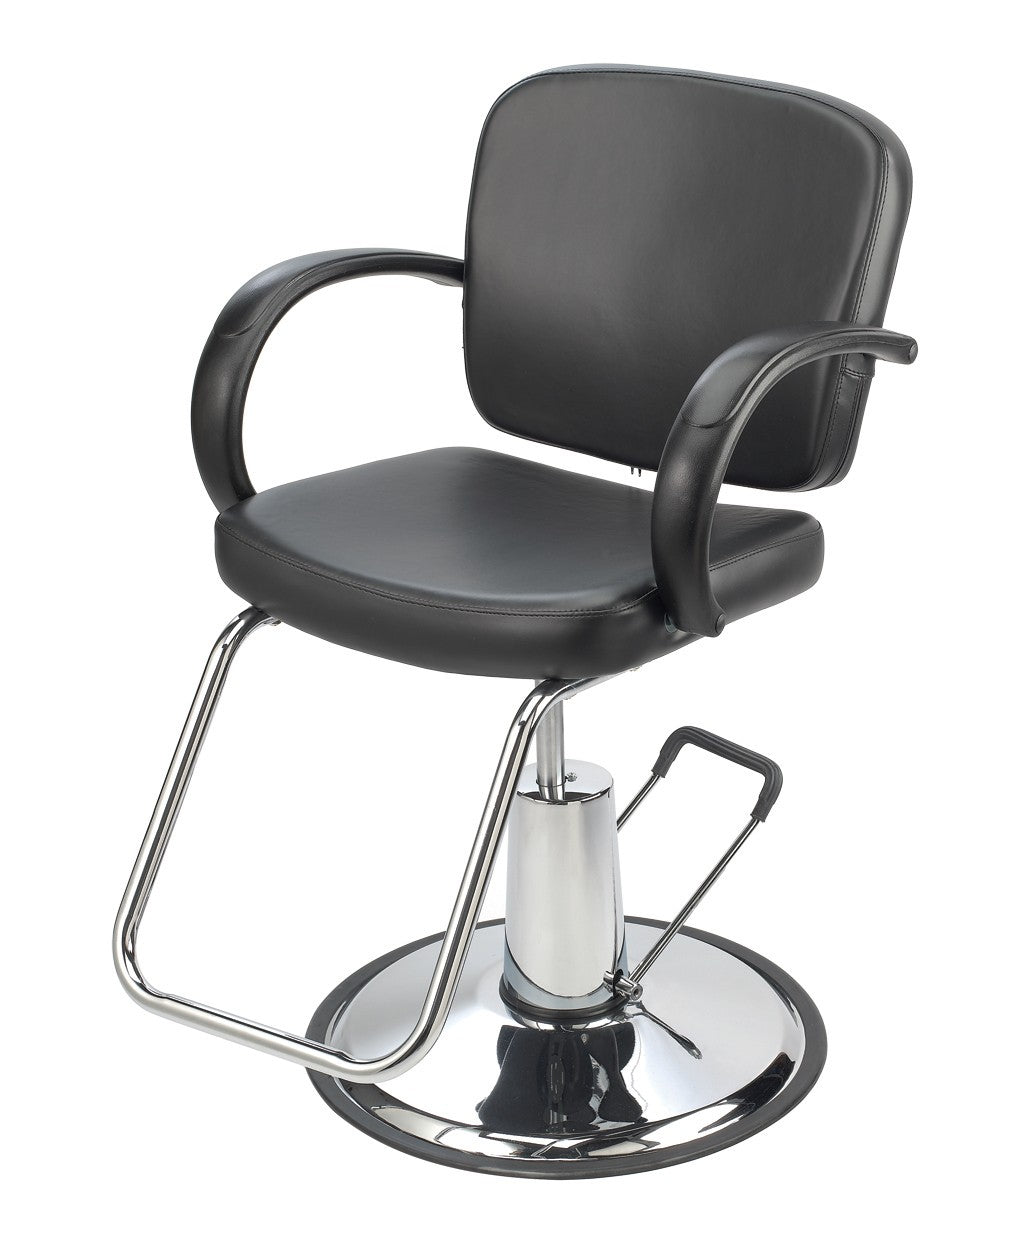 Pibbs 3606 Messina Styling Chair